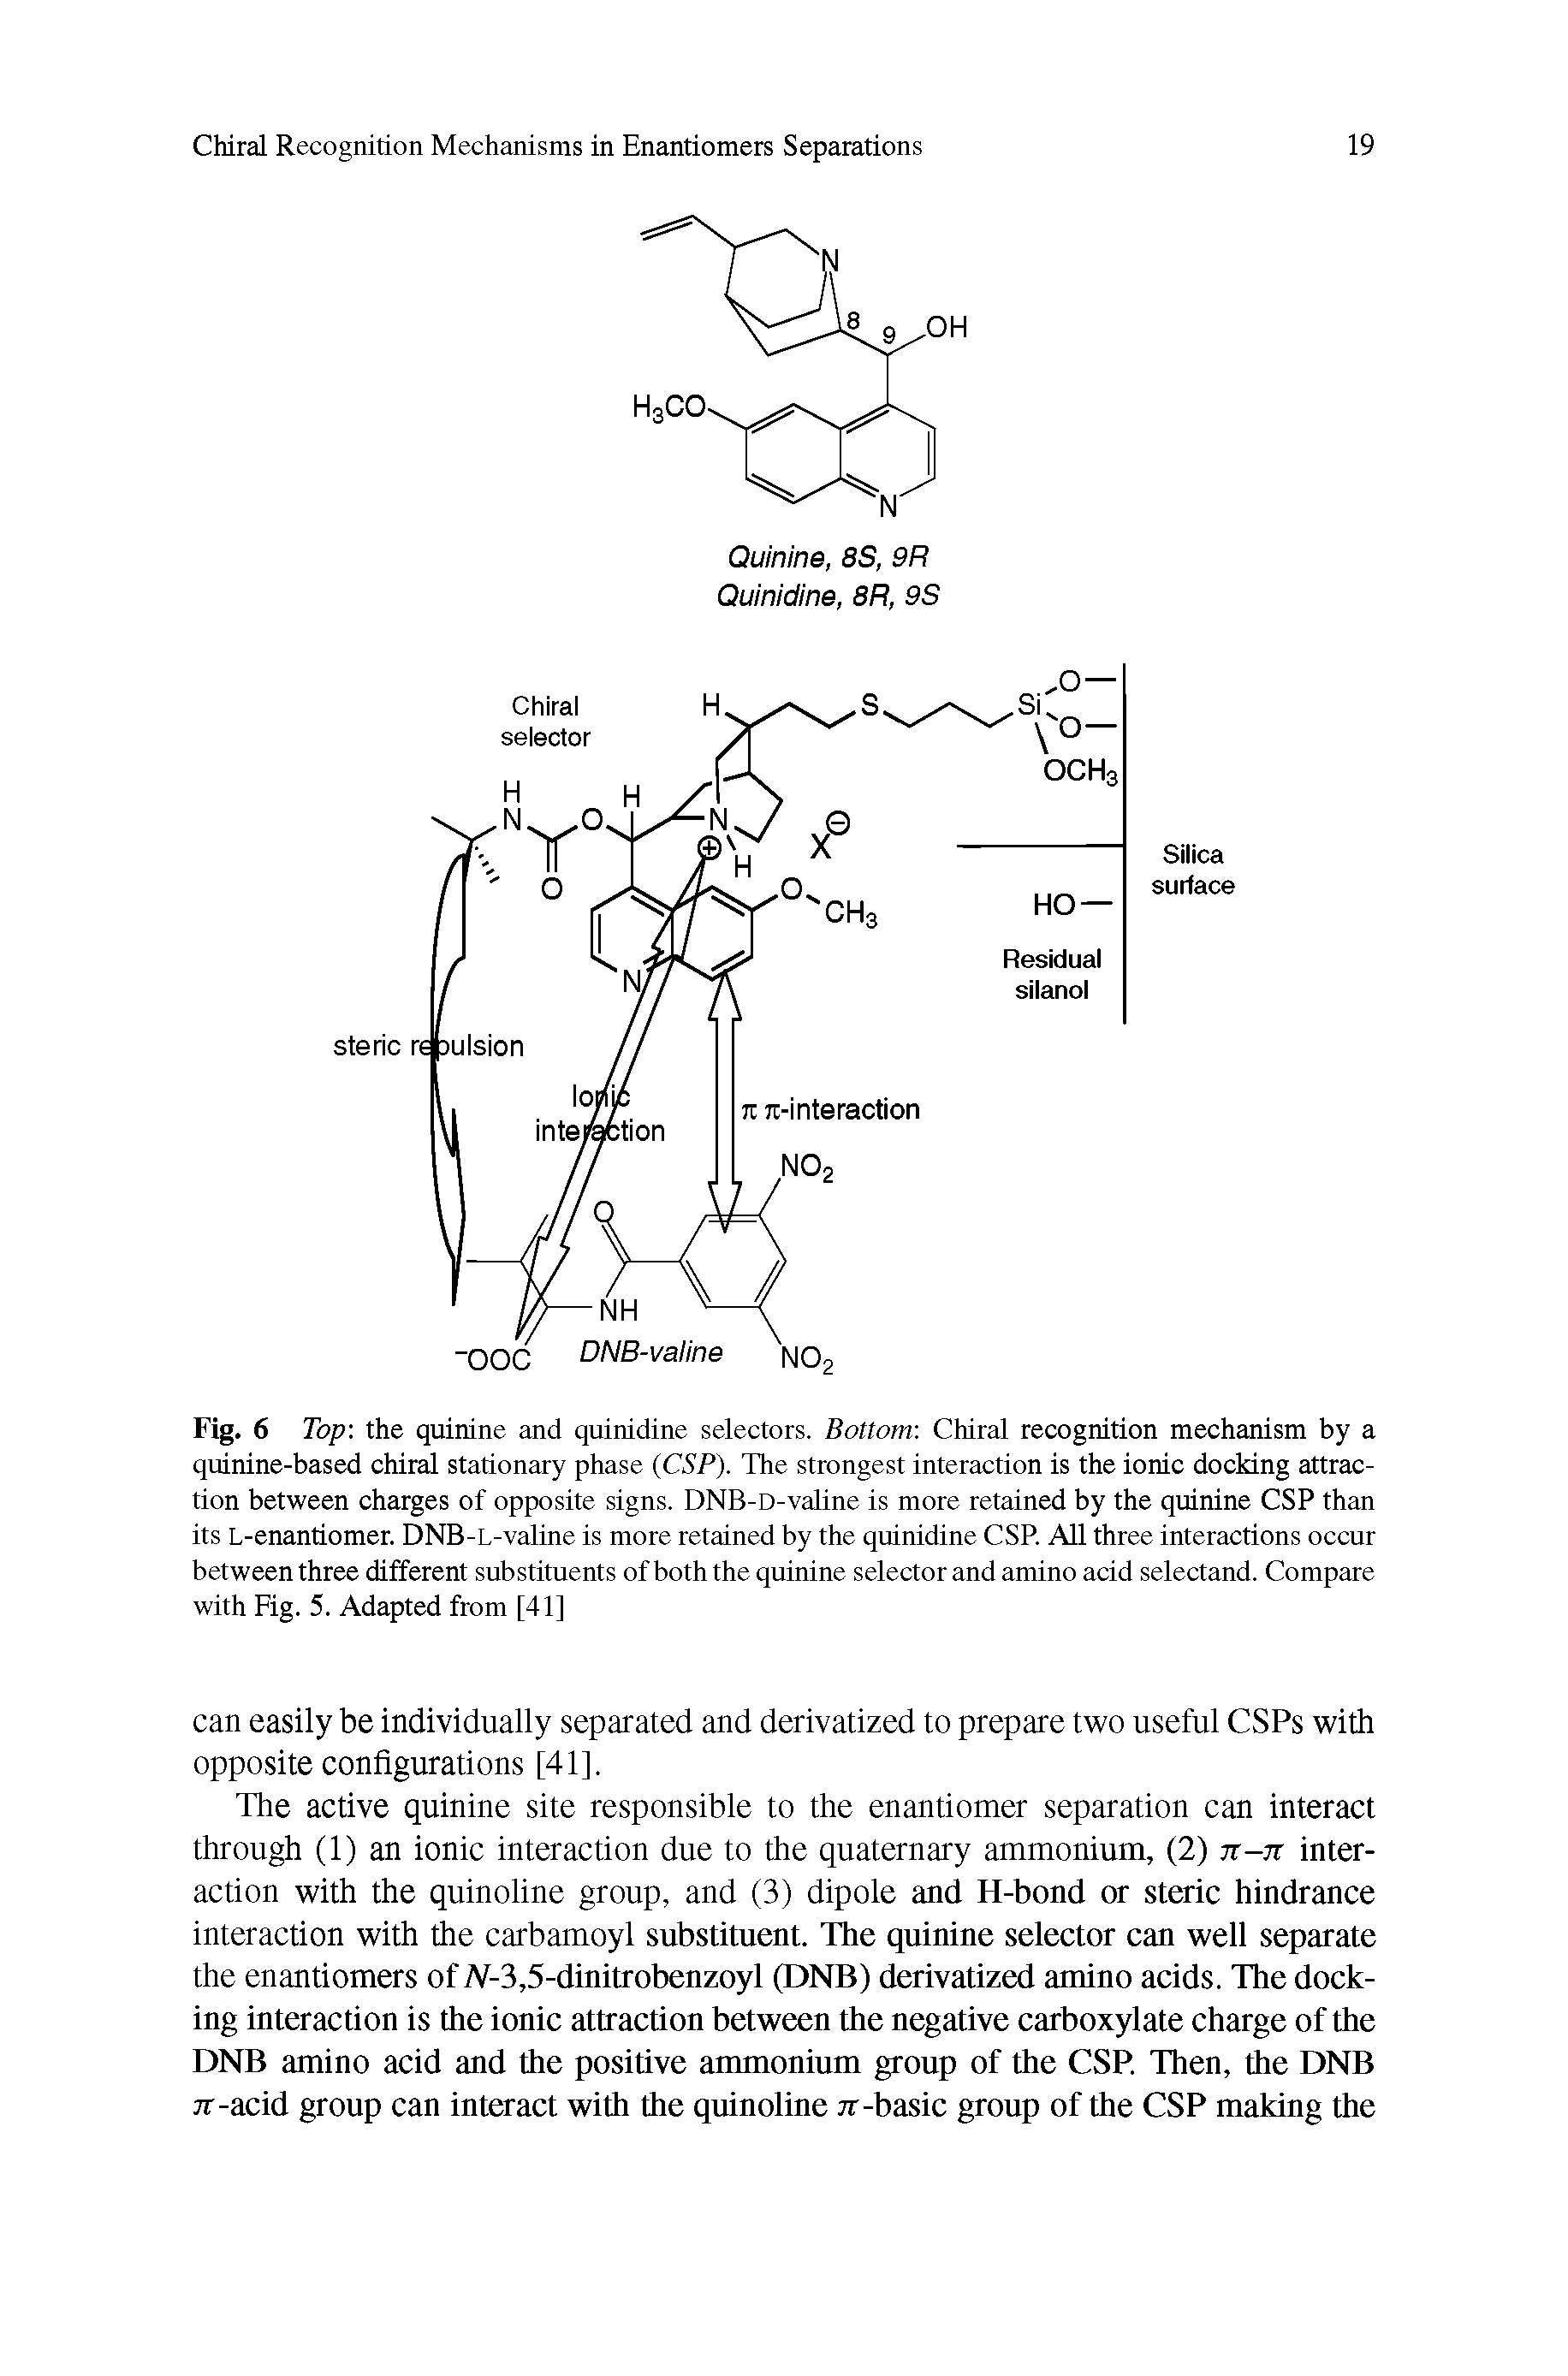 Fig. 6 Top the quinine and quinidine selectors. Bottom Chiral recognition mechanism by a quinine-based chiral stationary phase (CSP). The strongest interaction is the ionic docking attraction between charges of opposite signs. DNB-D-valine is more retained by the quinine CSP than its L-enantiomer. DNB-L-valine is more retained by the quinidine CSP. All three interactions occur between three different substituents of both the quinine selector and amino acid selectand. Compare with Fig. 5. Adapted from [41]...